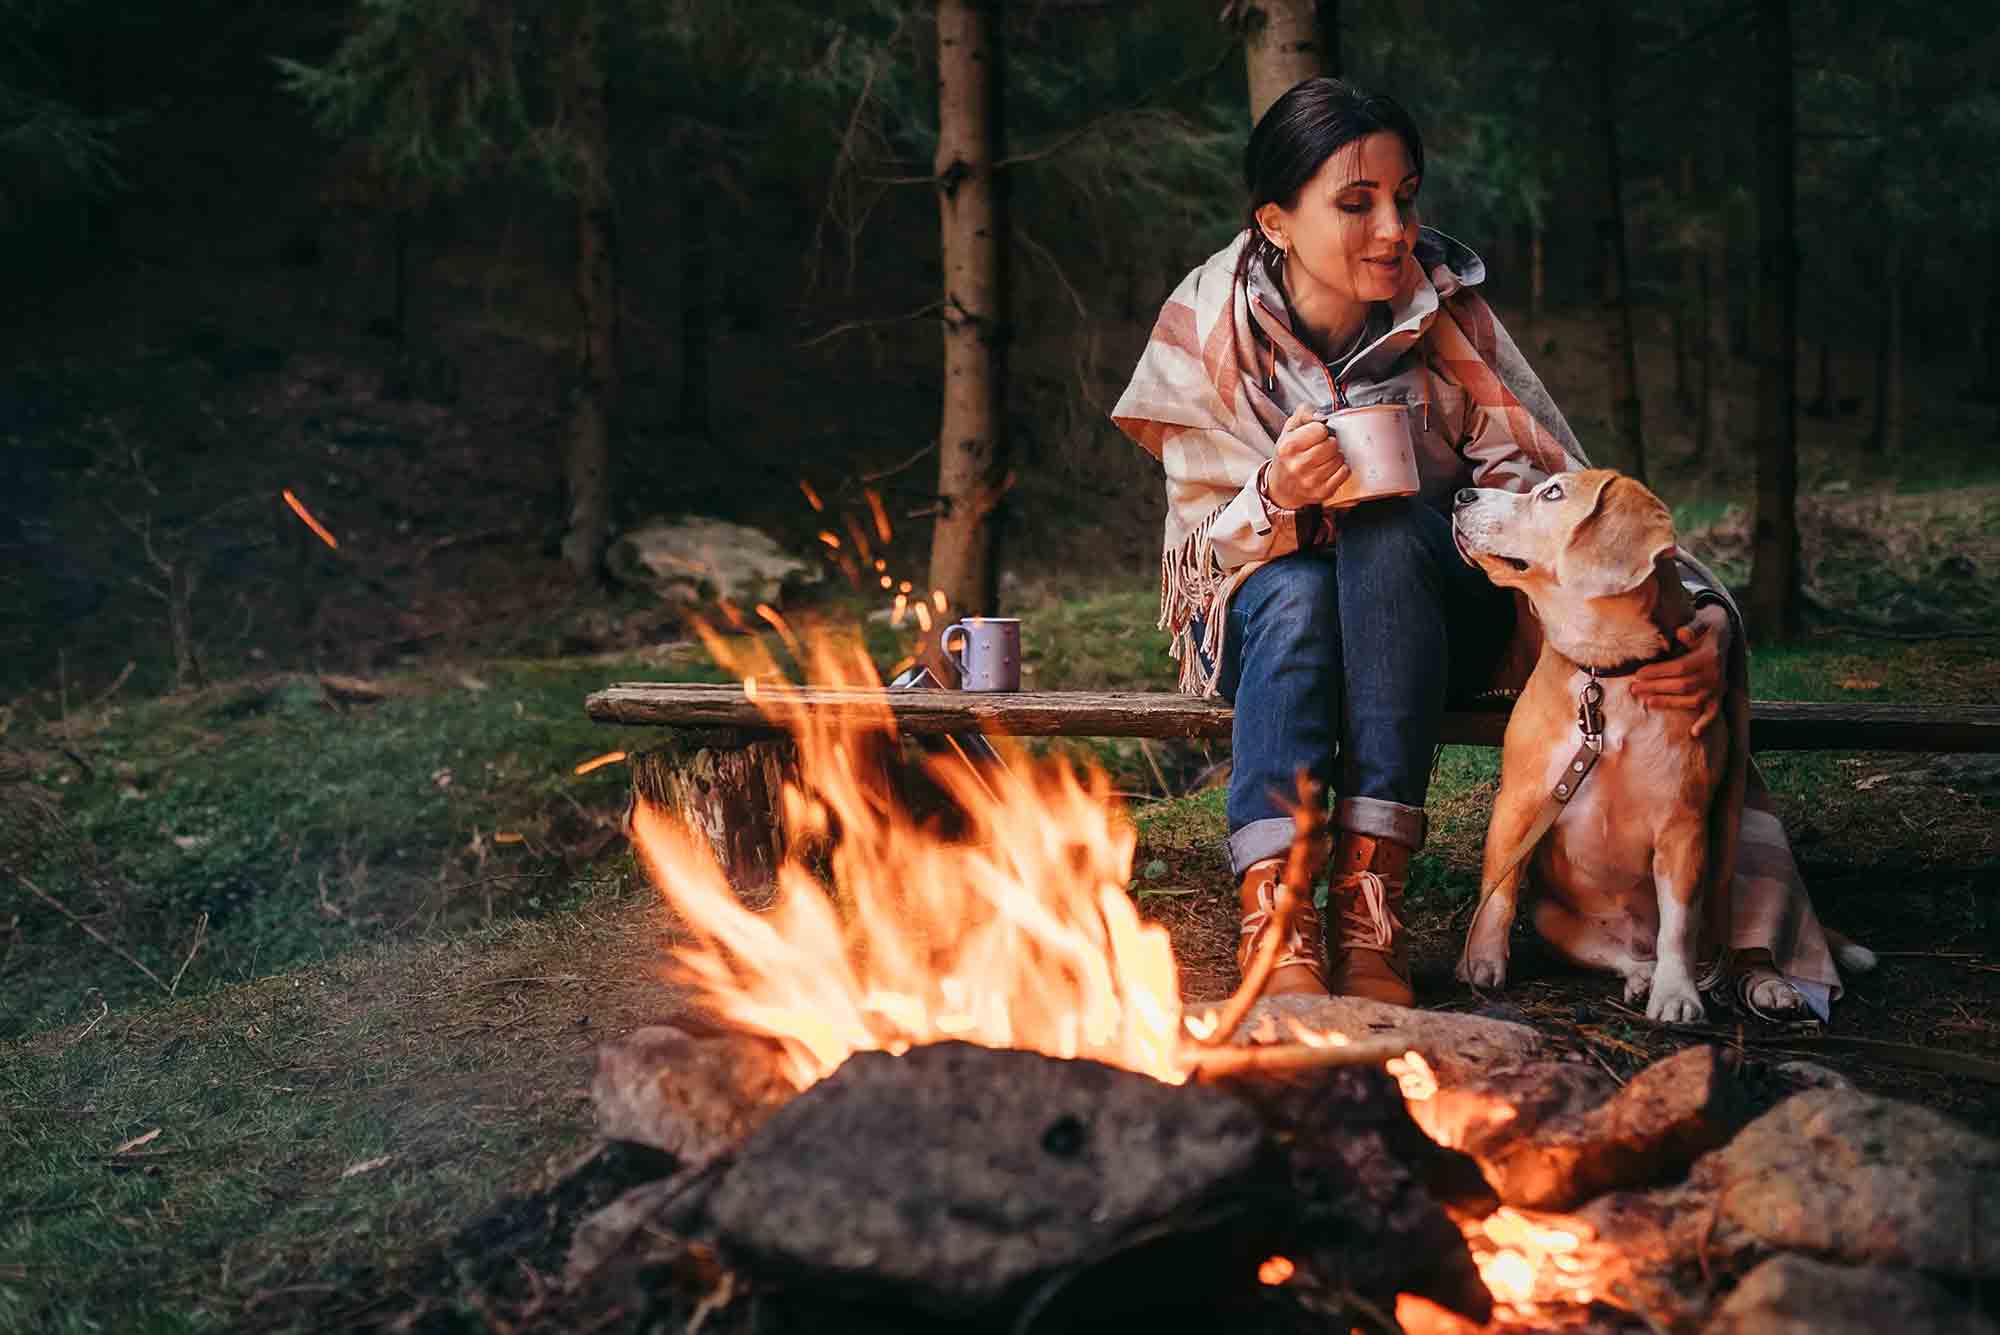 Camping outdoors with your dog is a great way to bond with pets